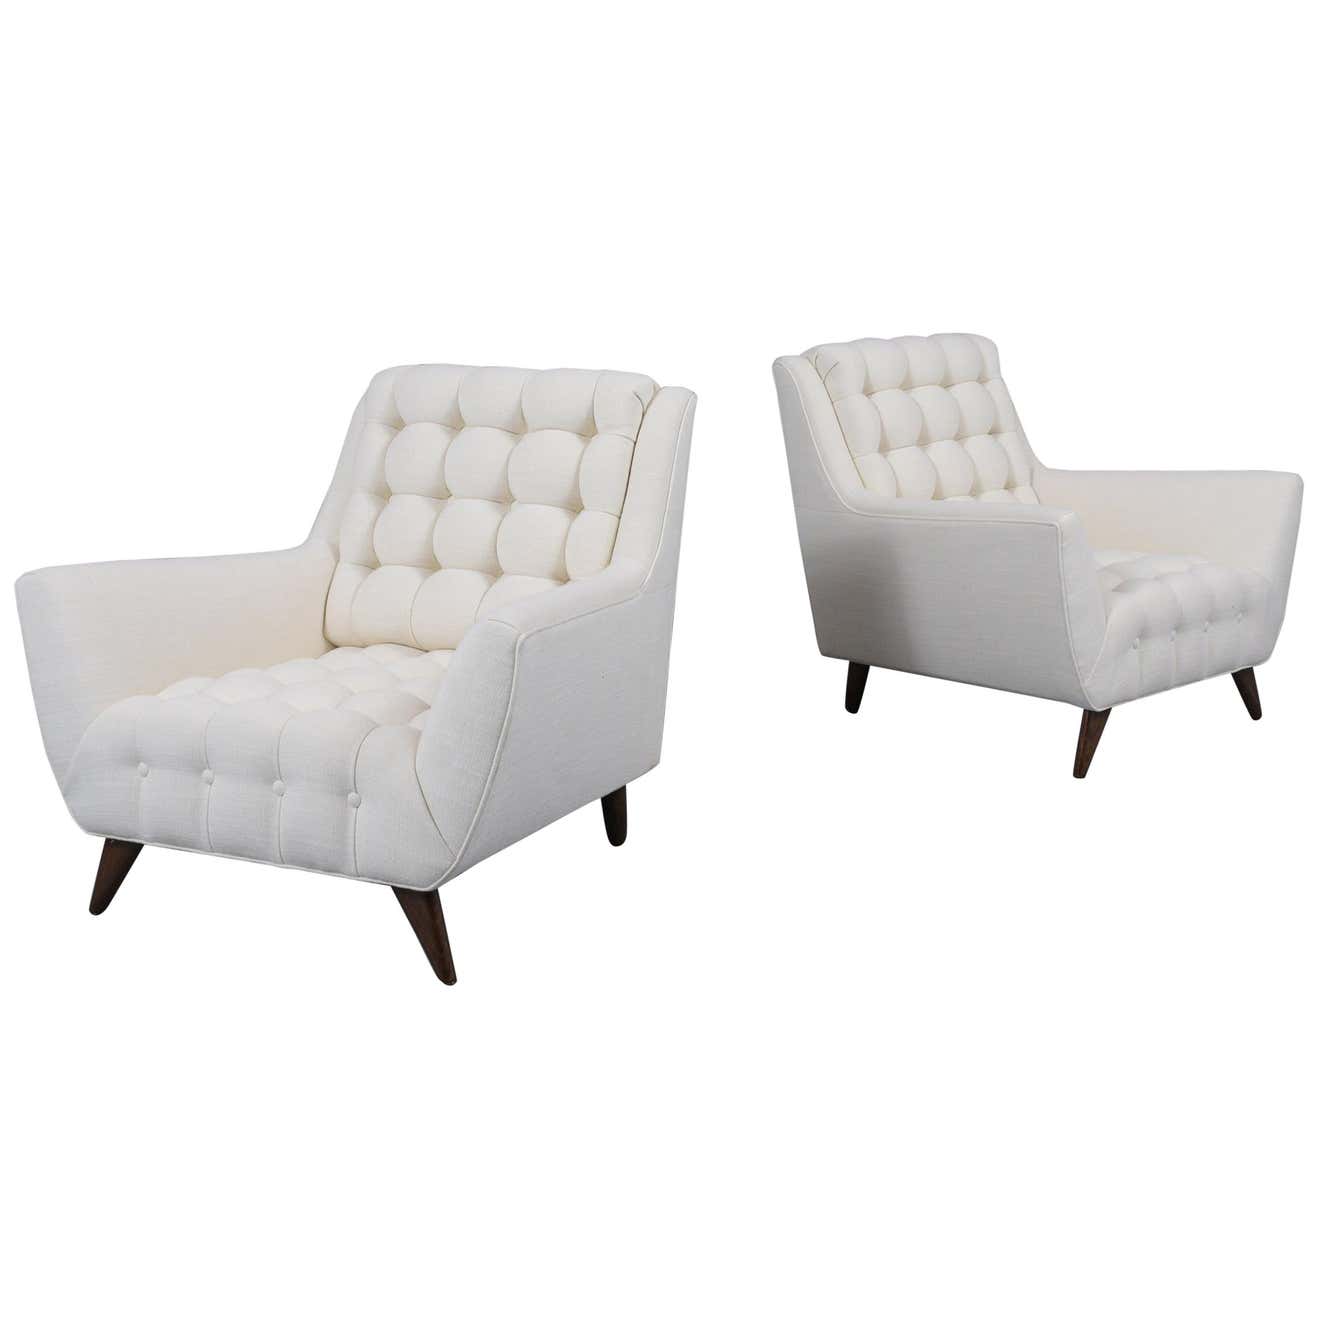 Pair of Mid-Century Biscuit Tufted Lounge Chairs